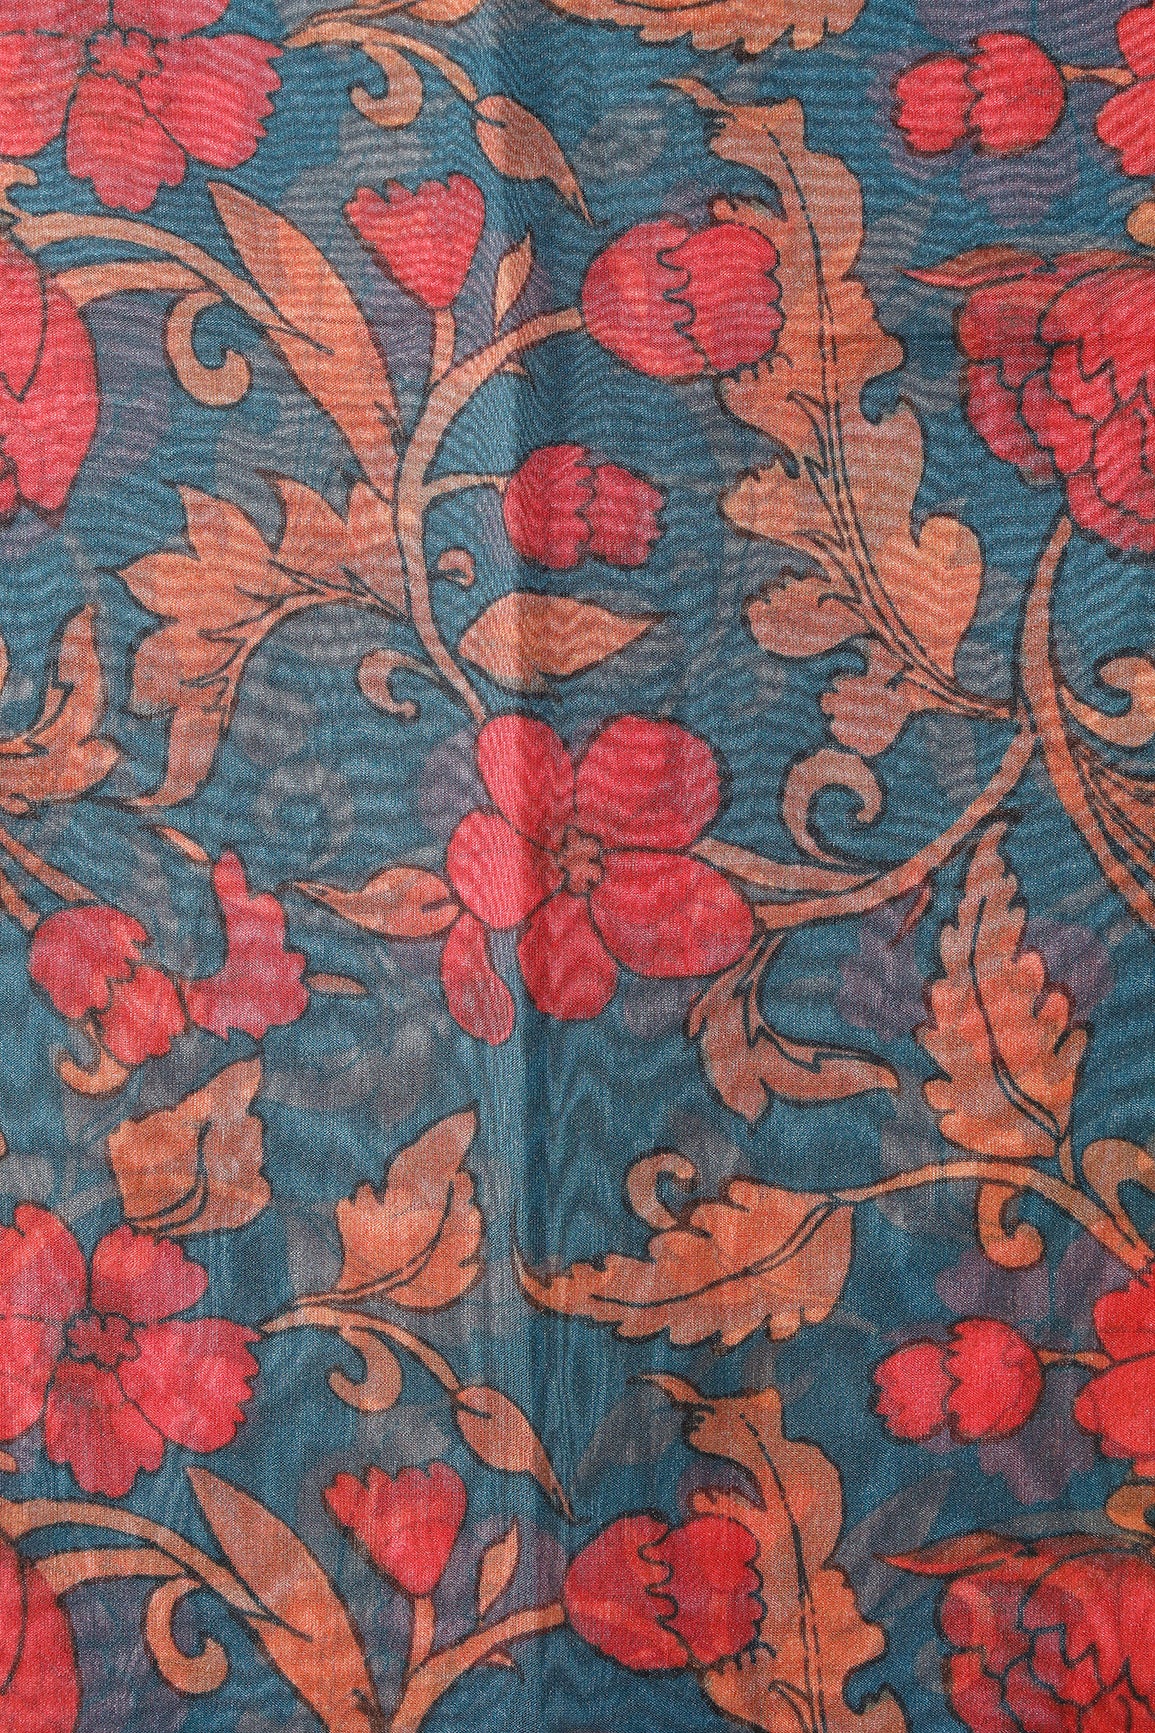 Red And Orange Floral Digital Print On Prussian Blue Organza Fabric